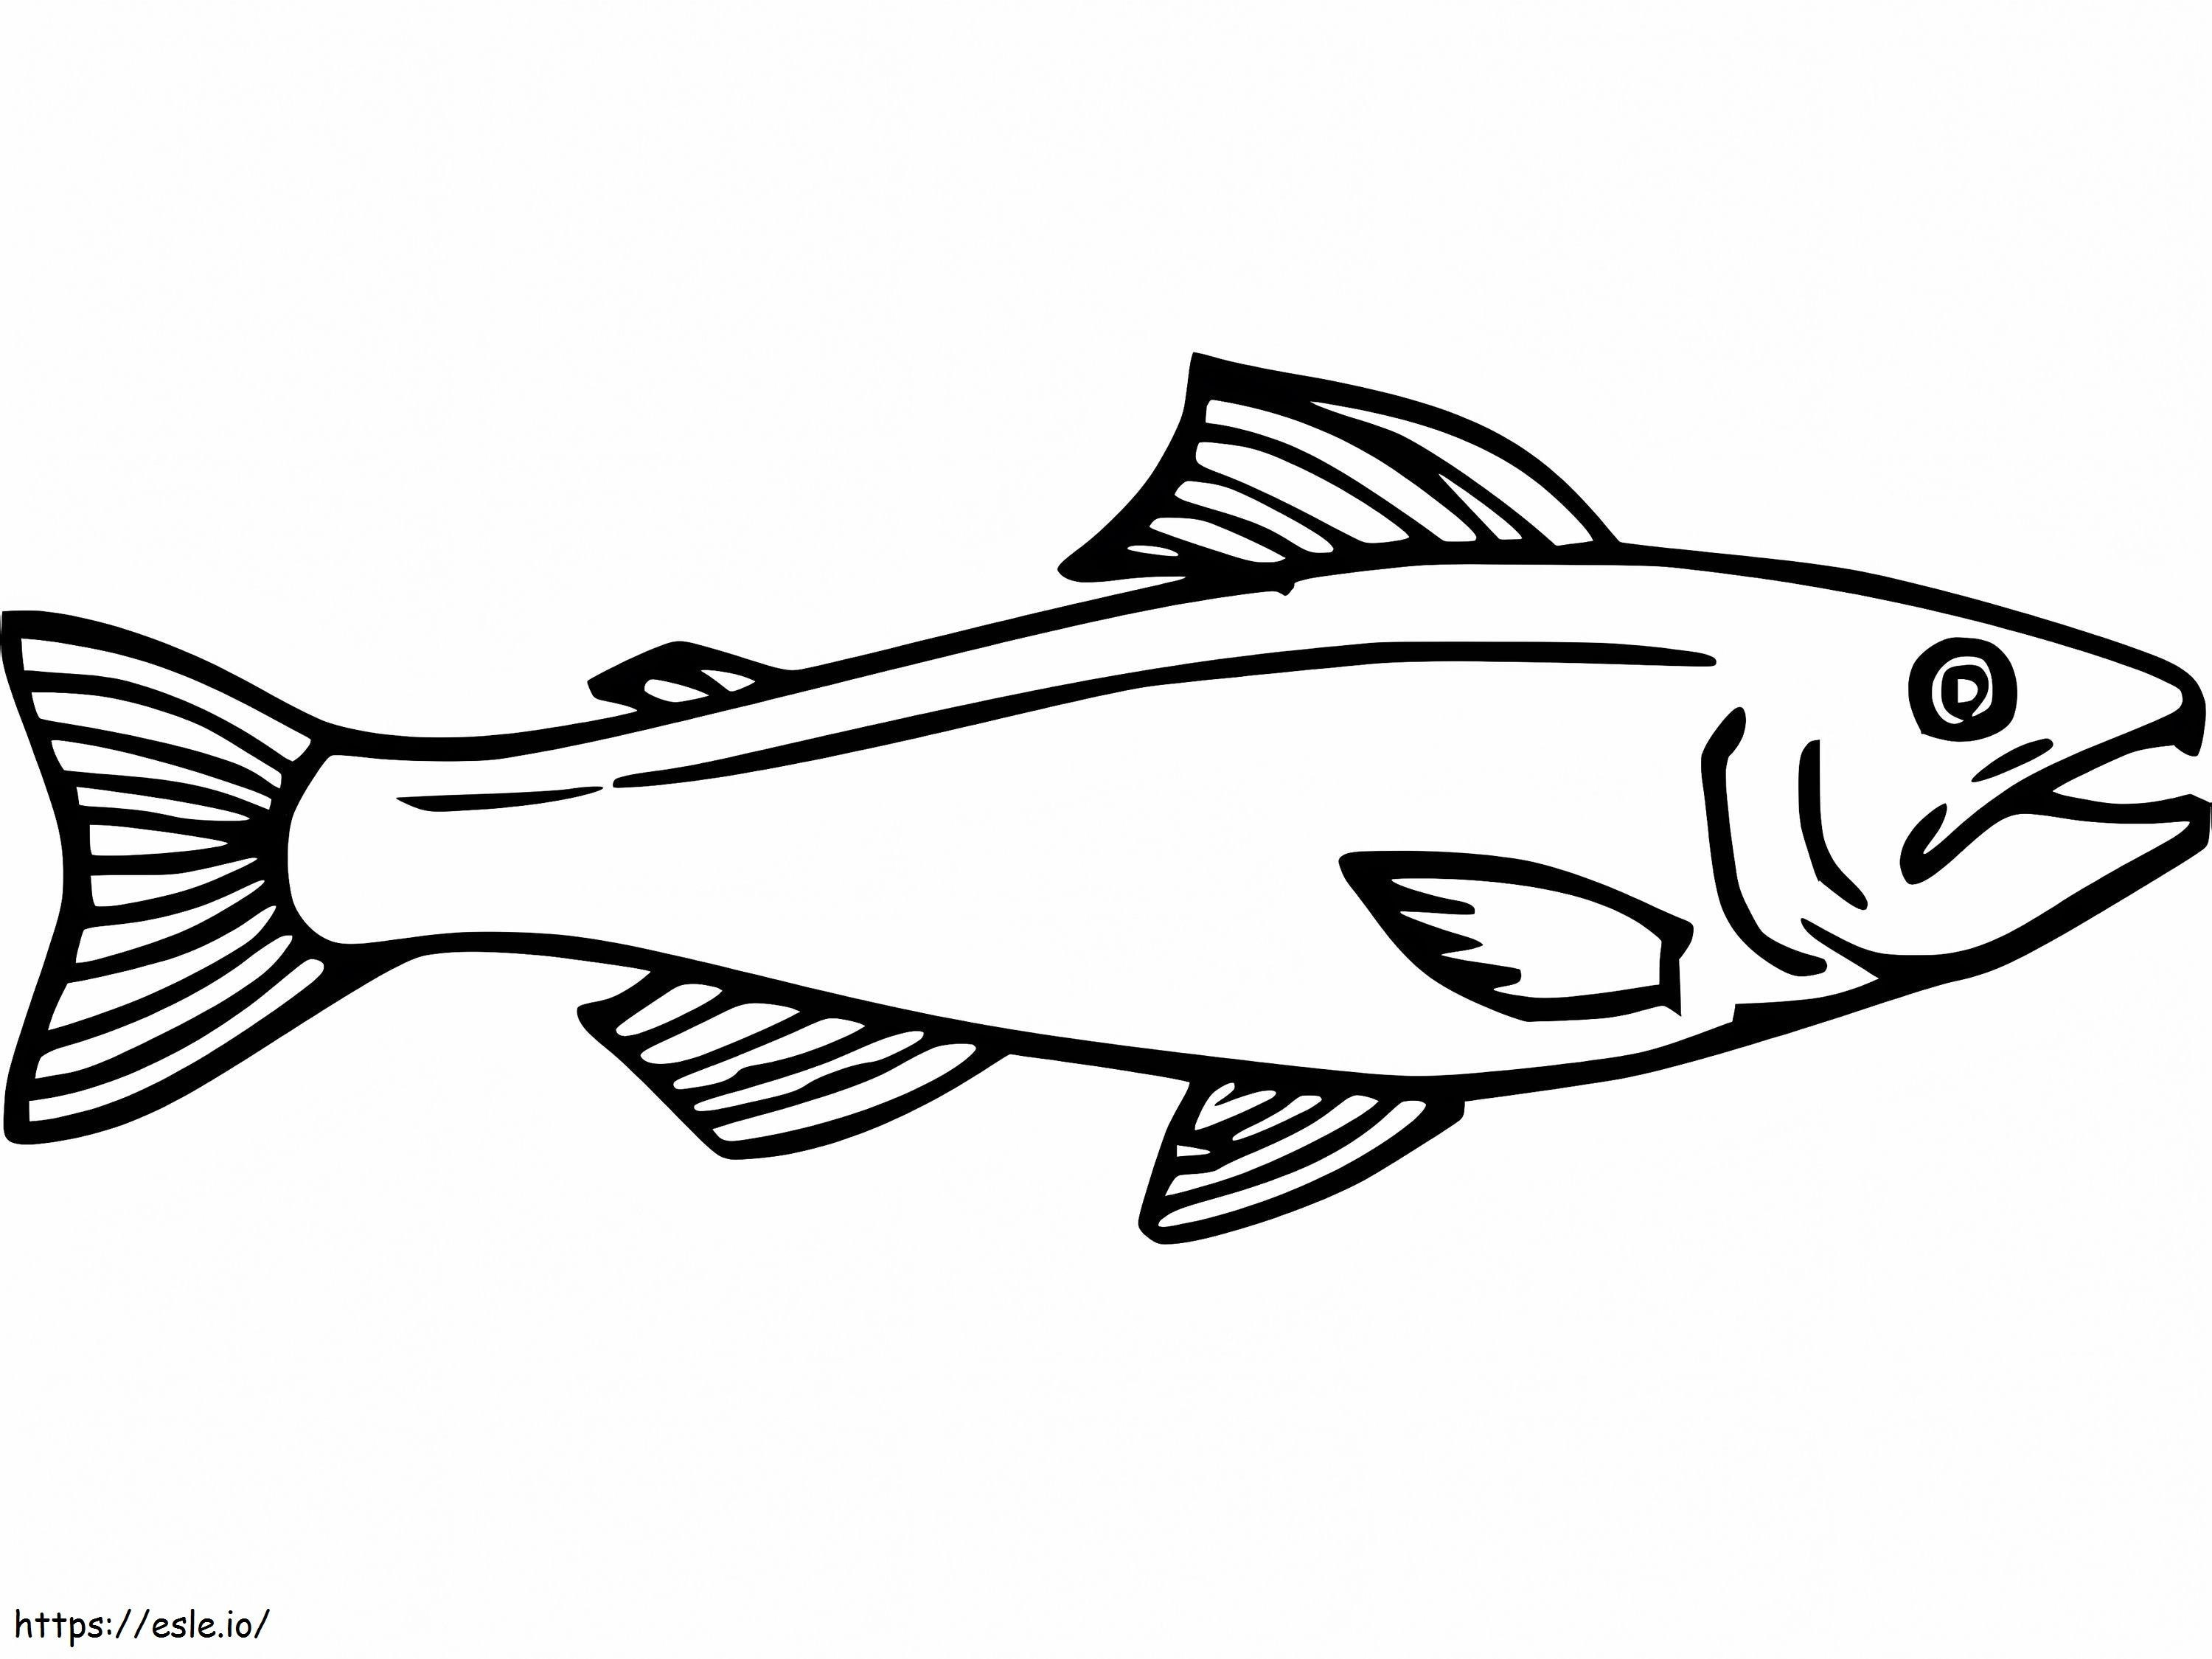 Salmon 1 coloring page